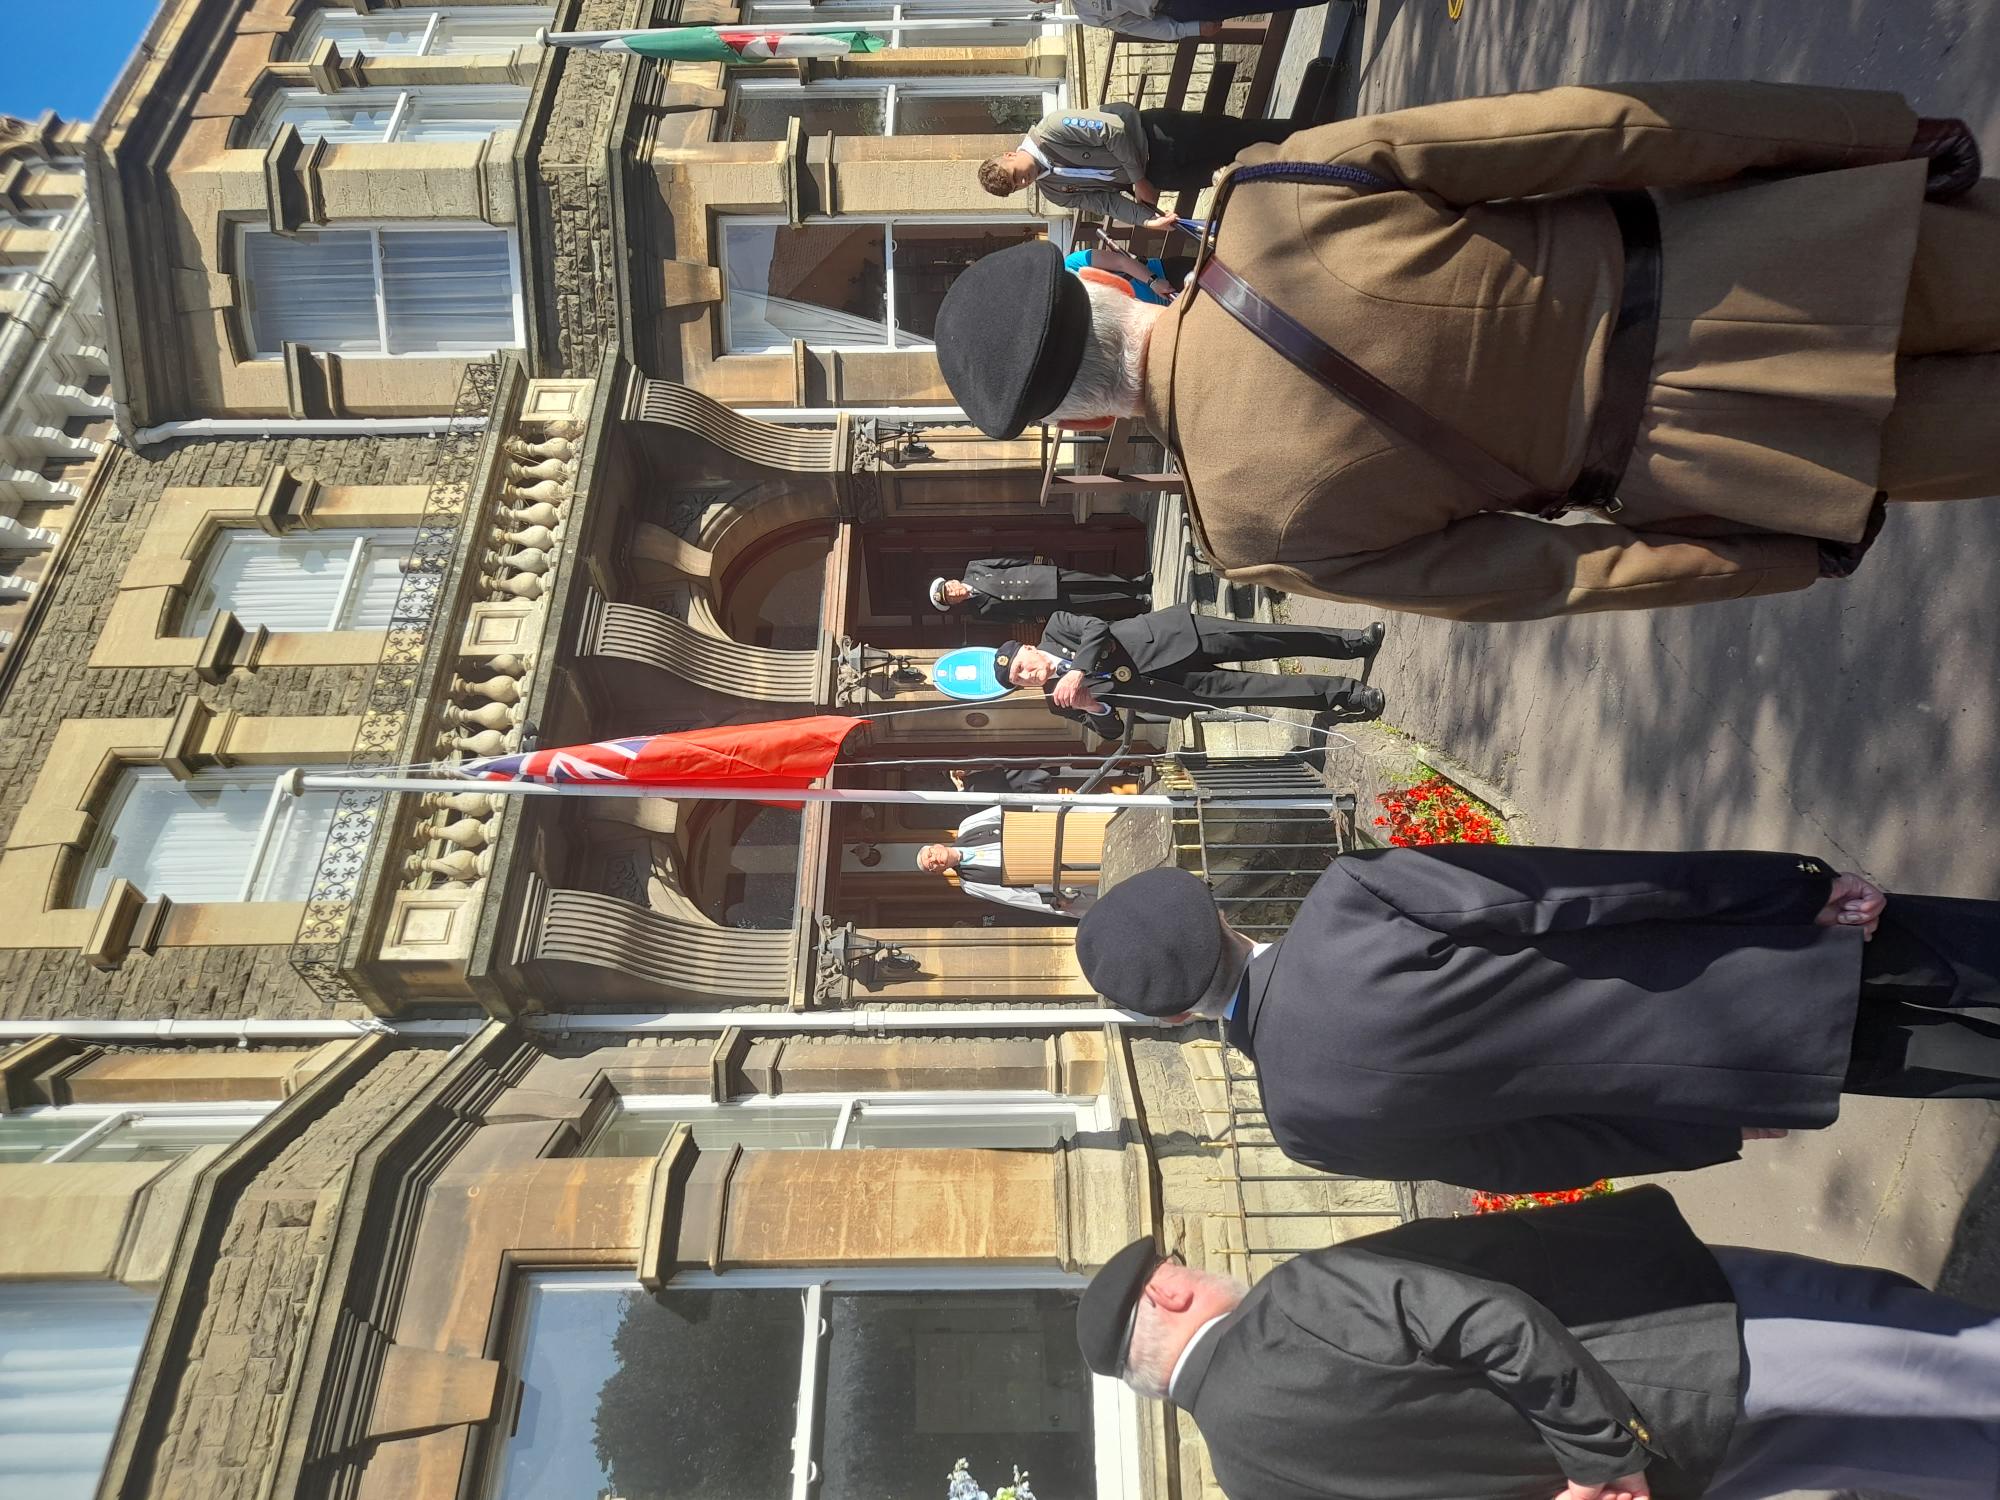 TONY MEADE RAISING THE RED ENSIGN